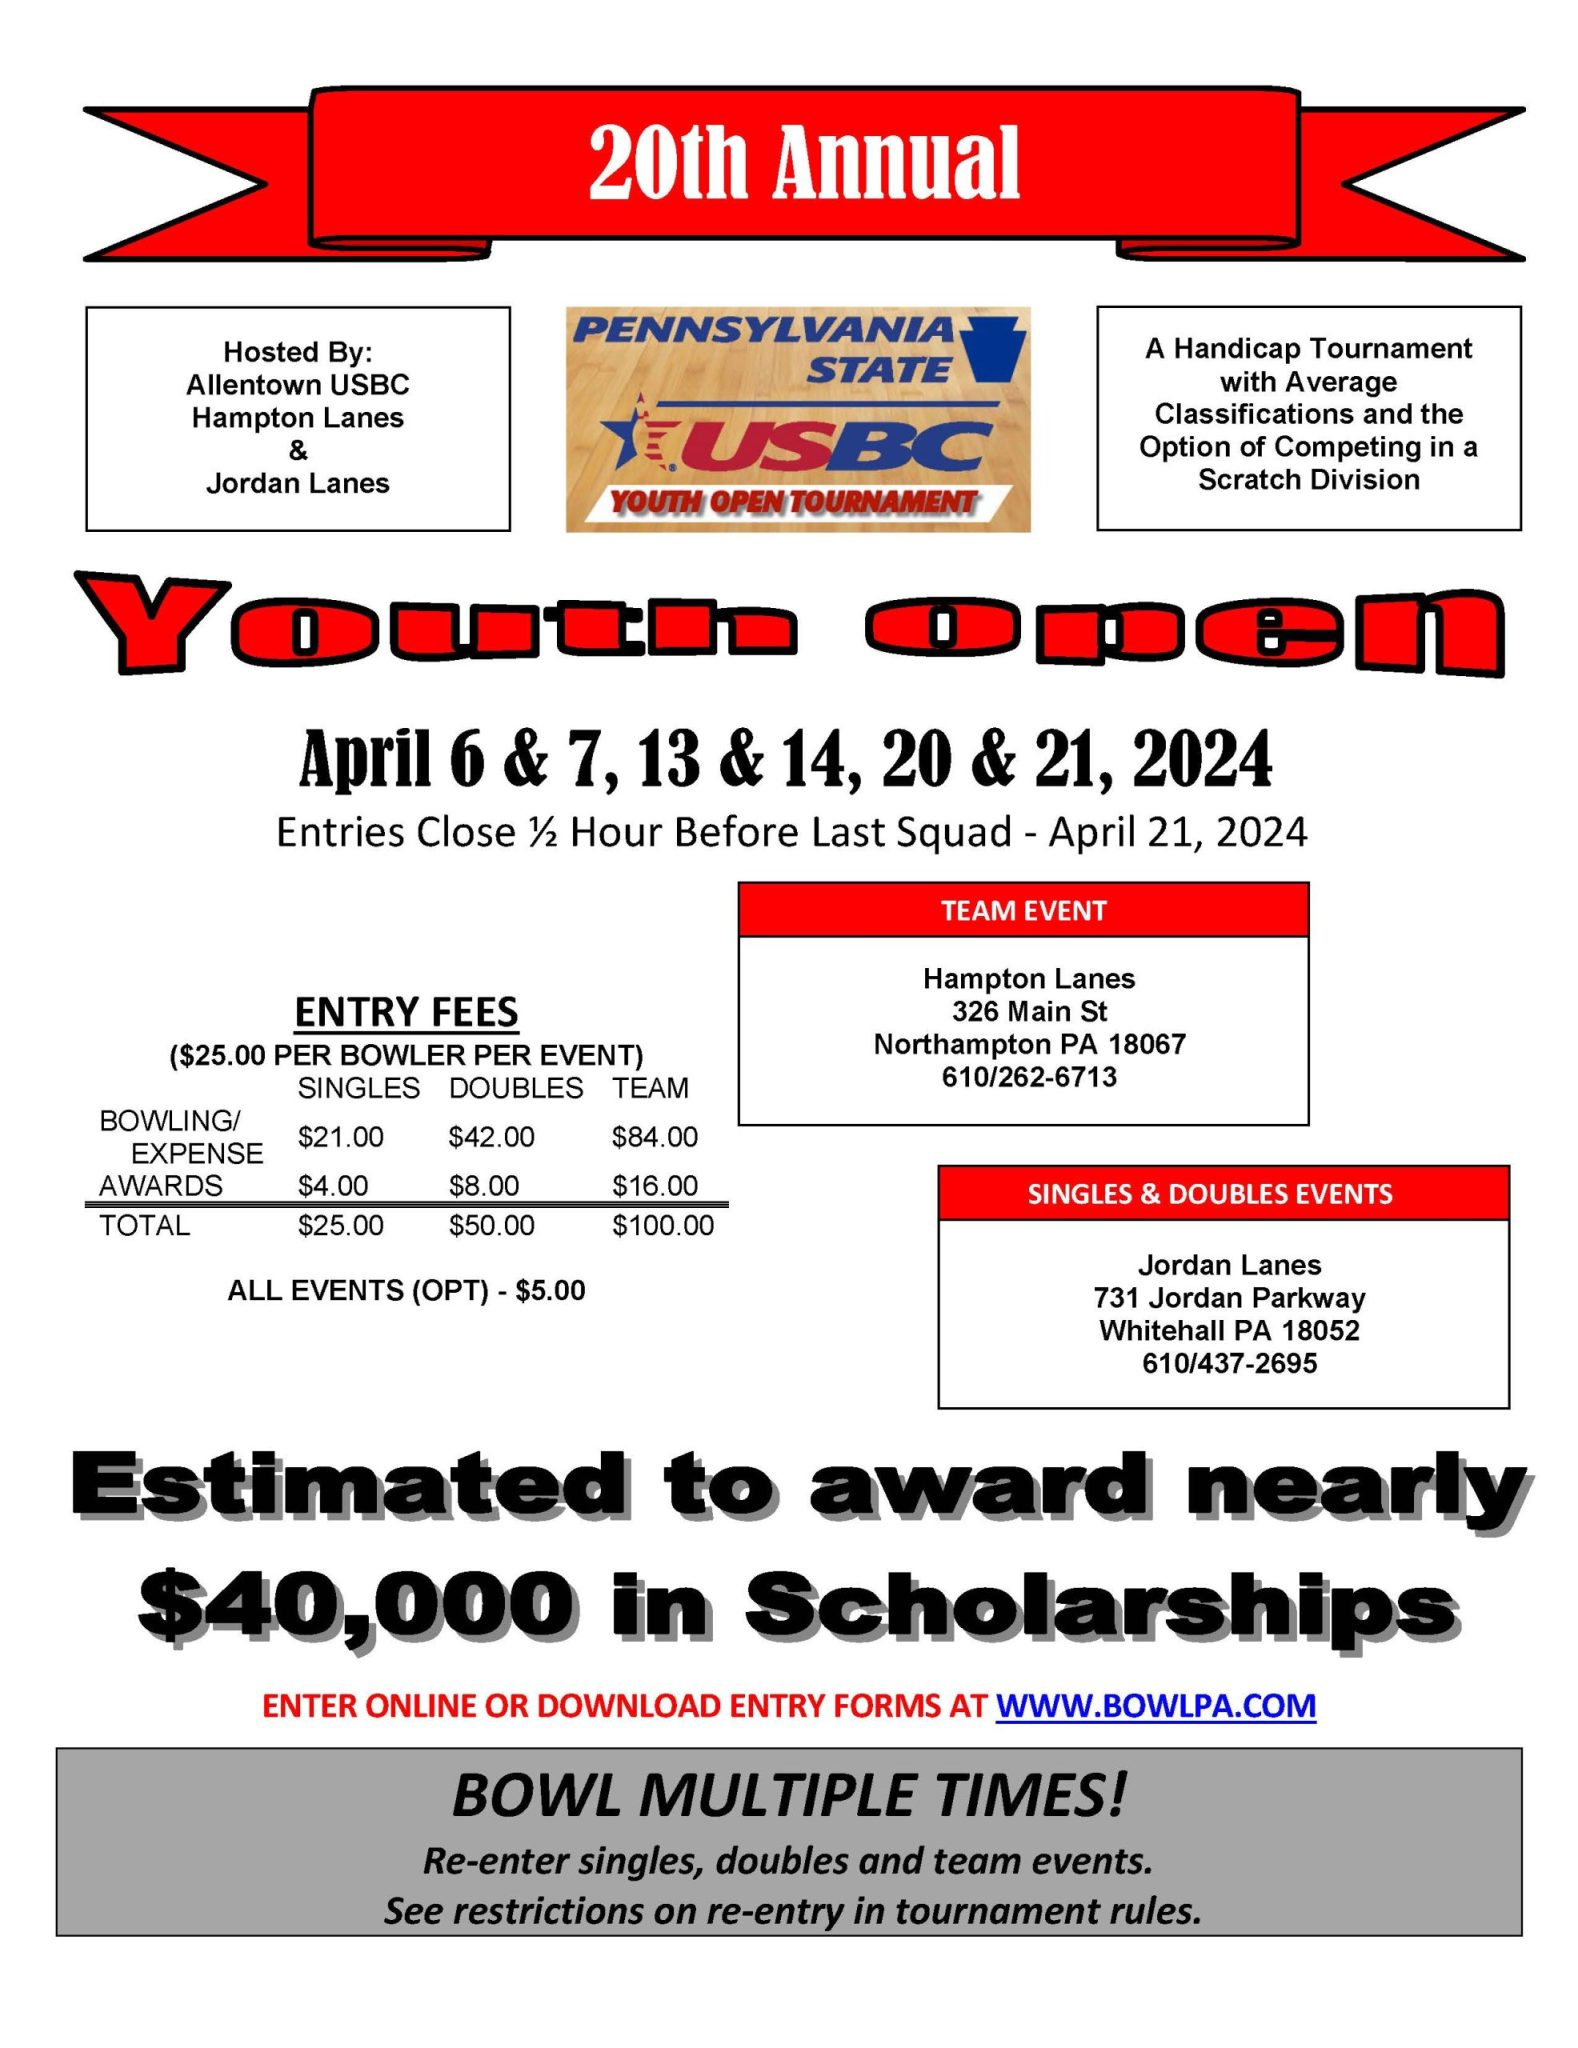 20th Annual Pennsylvania State Youth Open @ The New Jordan Lanes